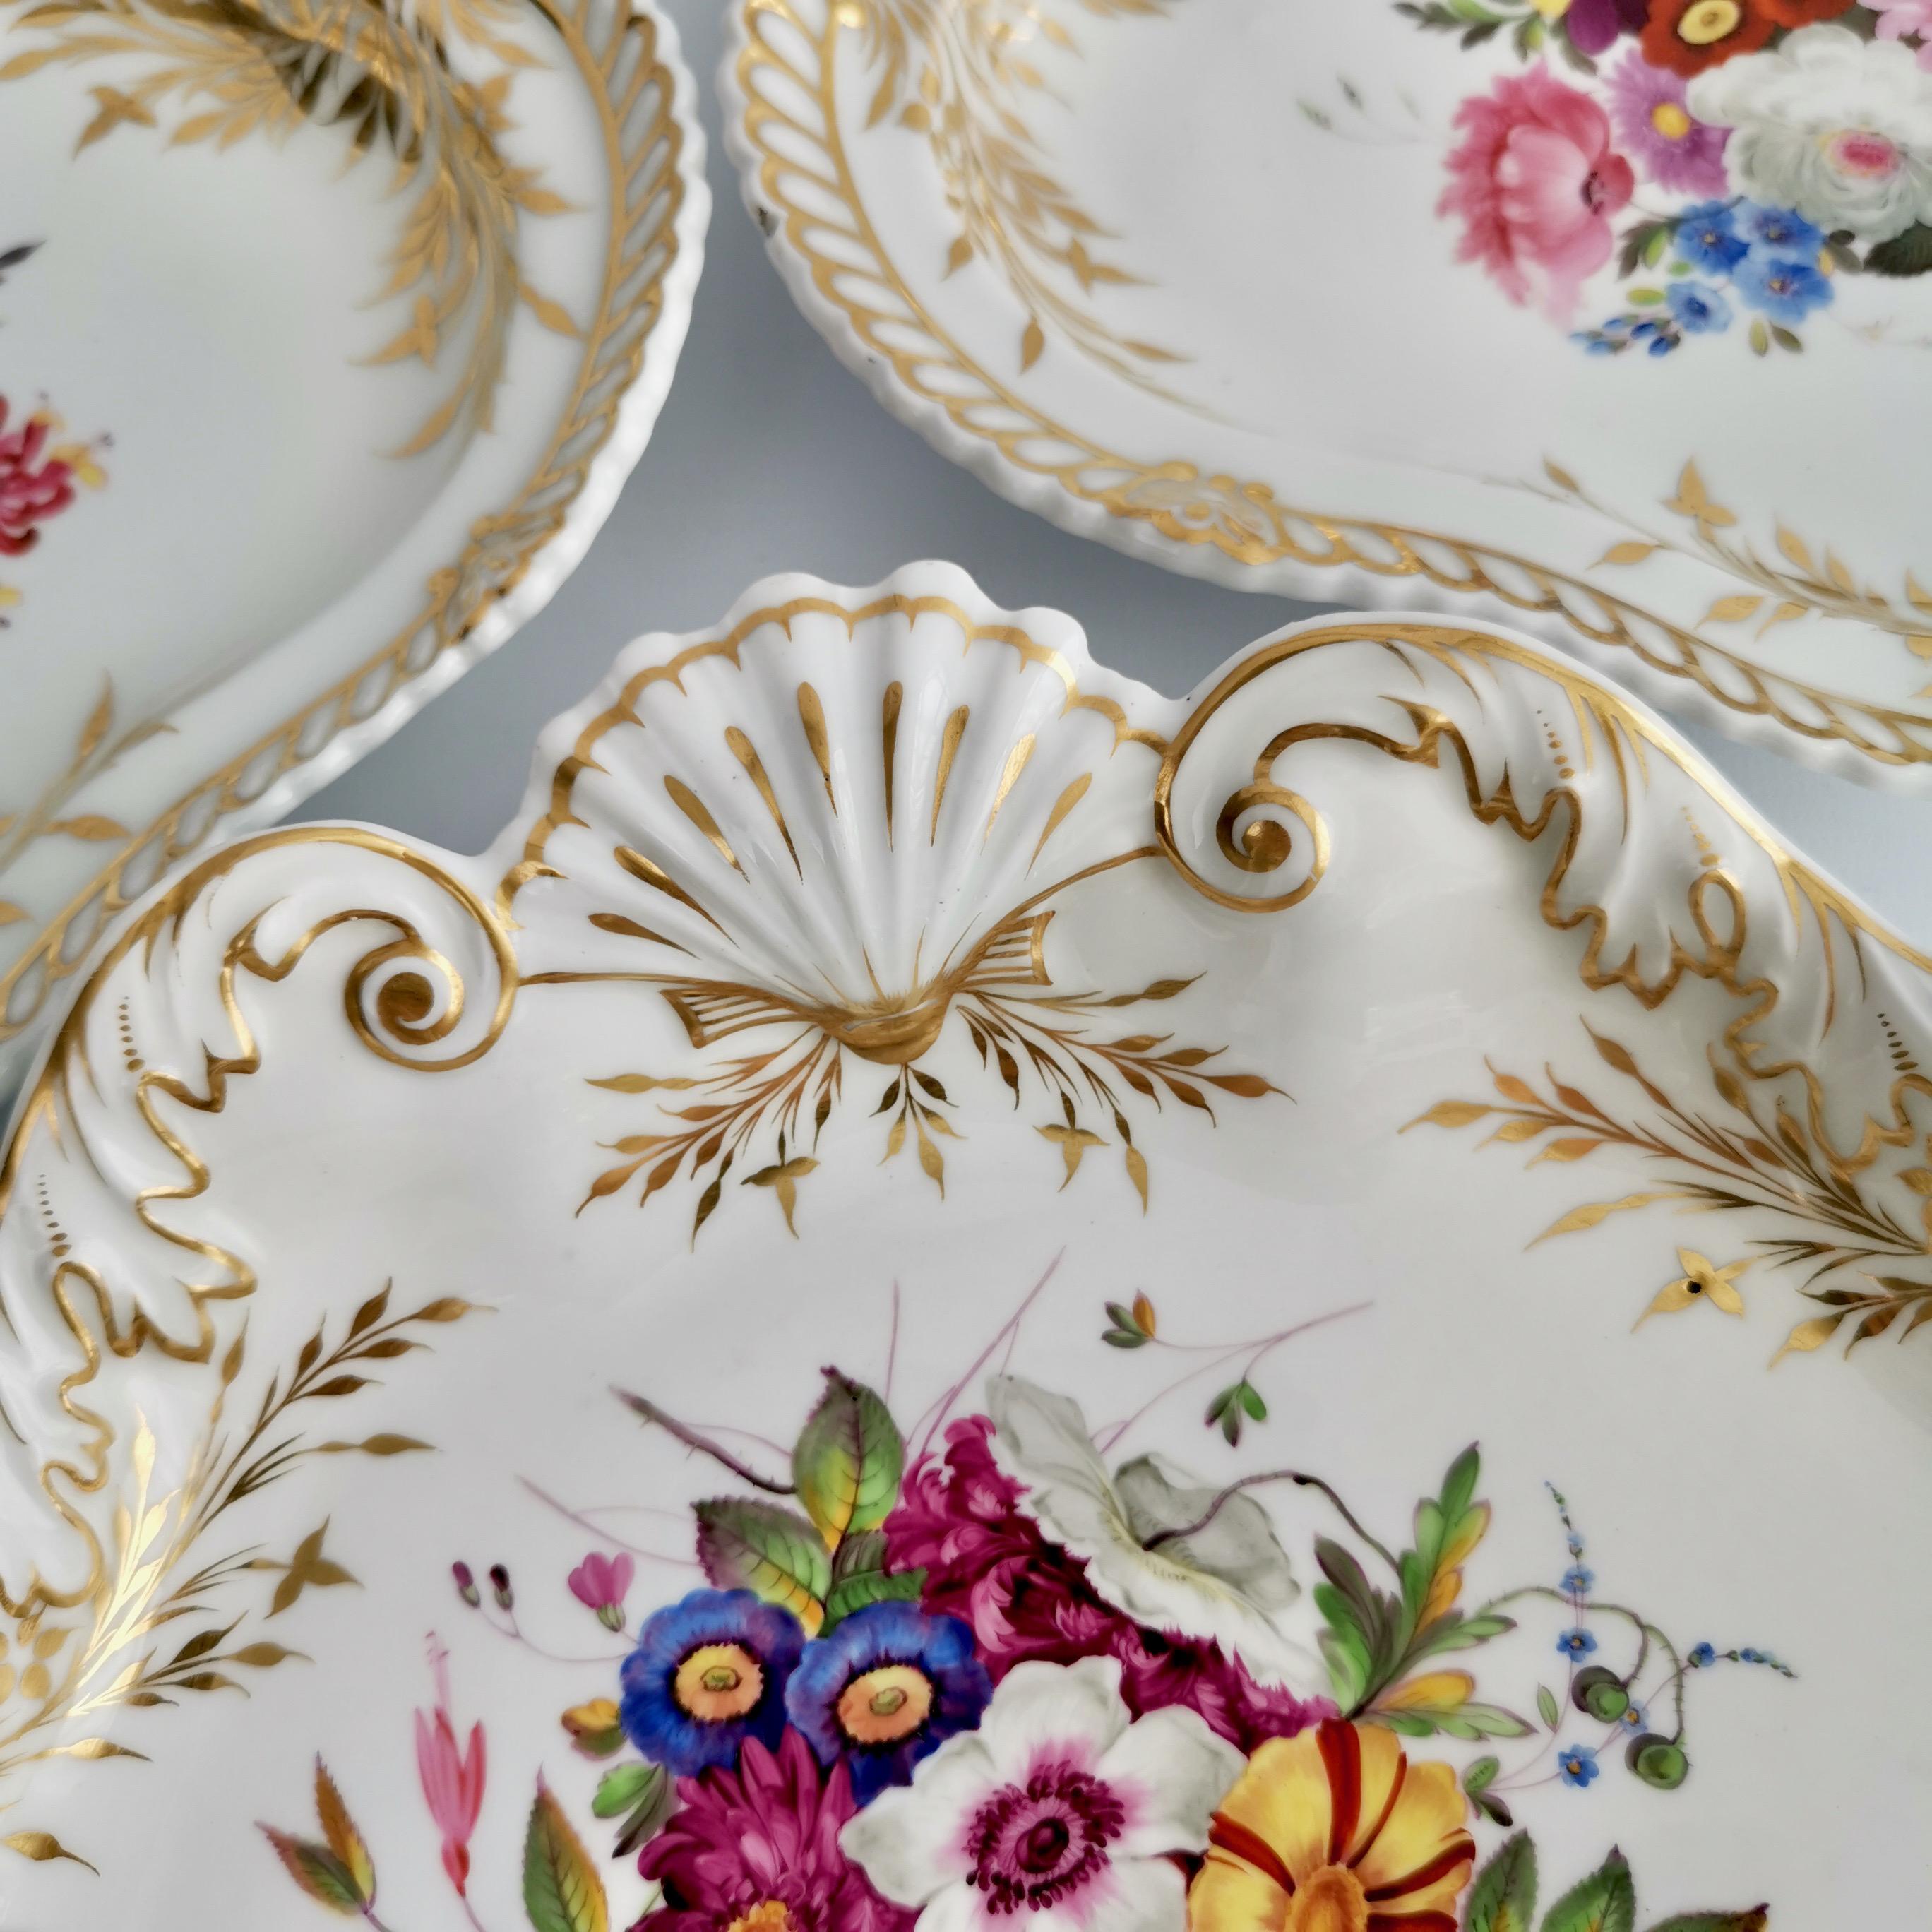 Chamberlains Worcester Dessert Service, White with Flowers, Regency, ca 1822 For Sale 12